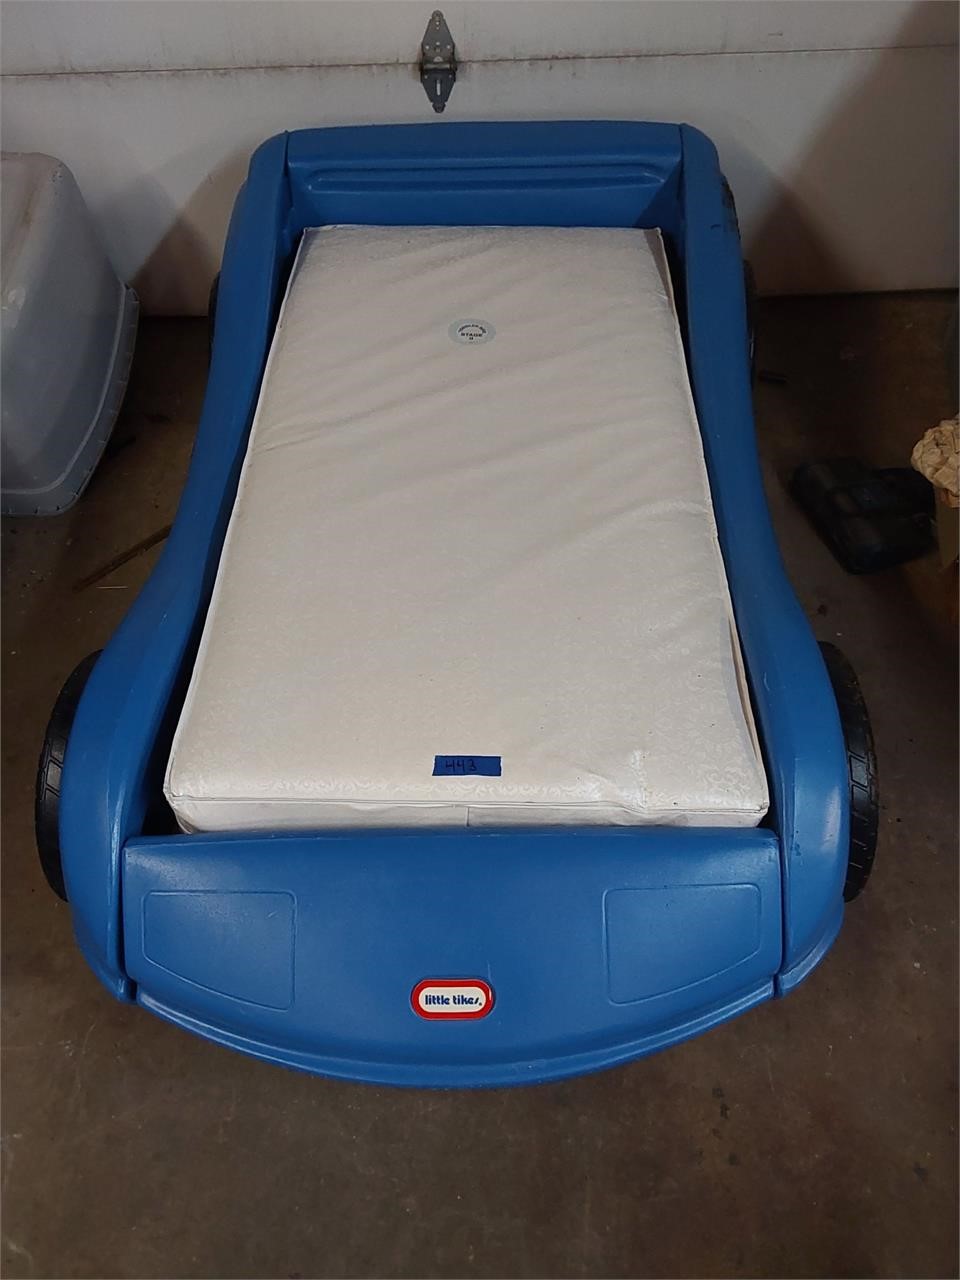 Little Tikes Car Bed with mattress